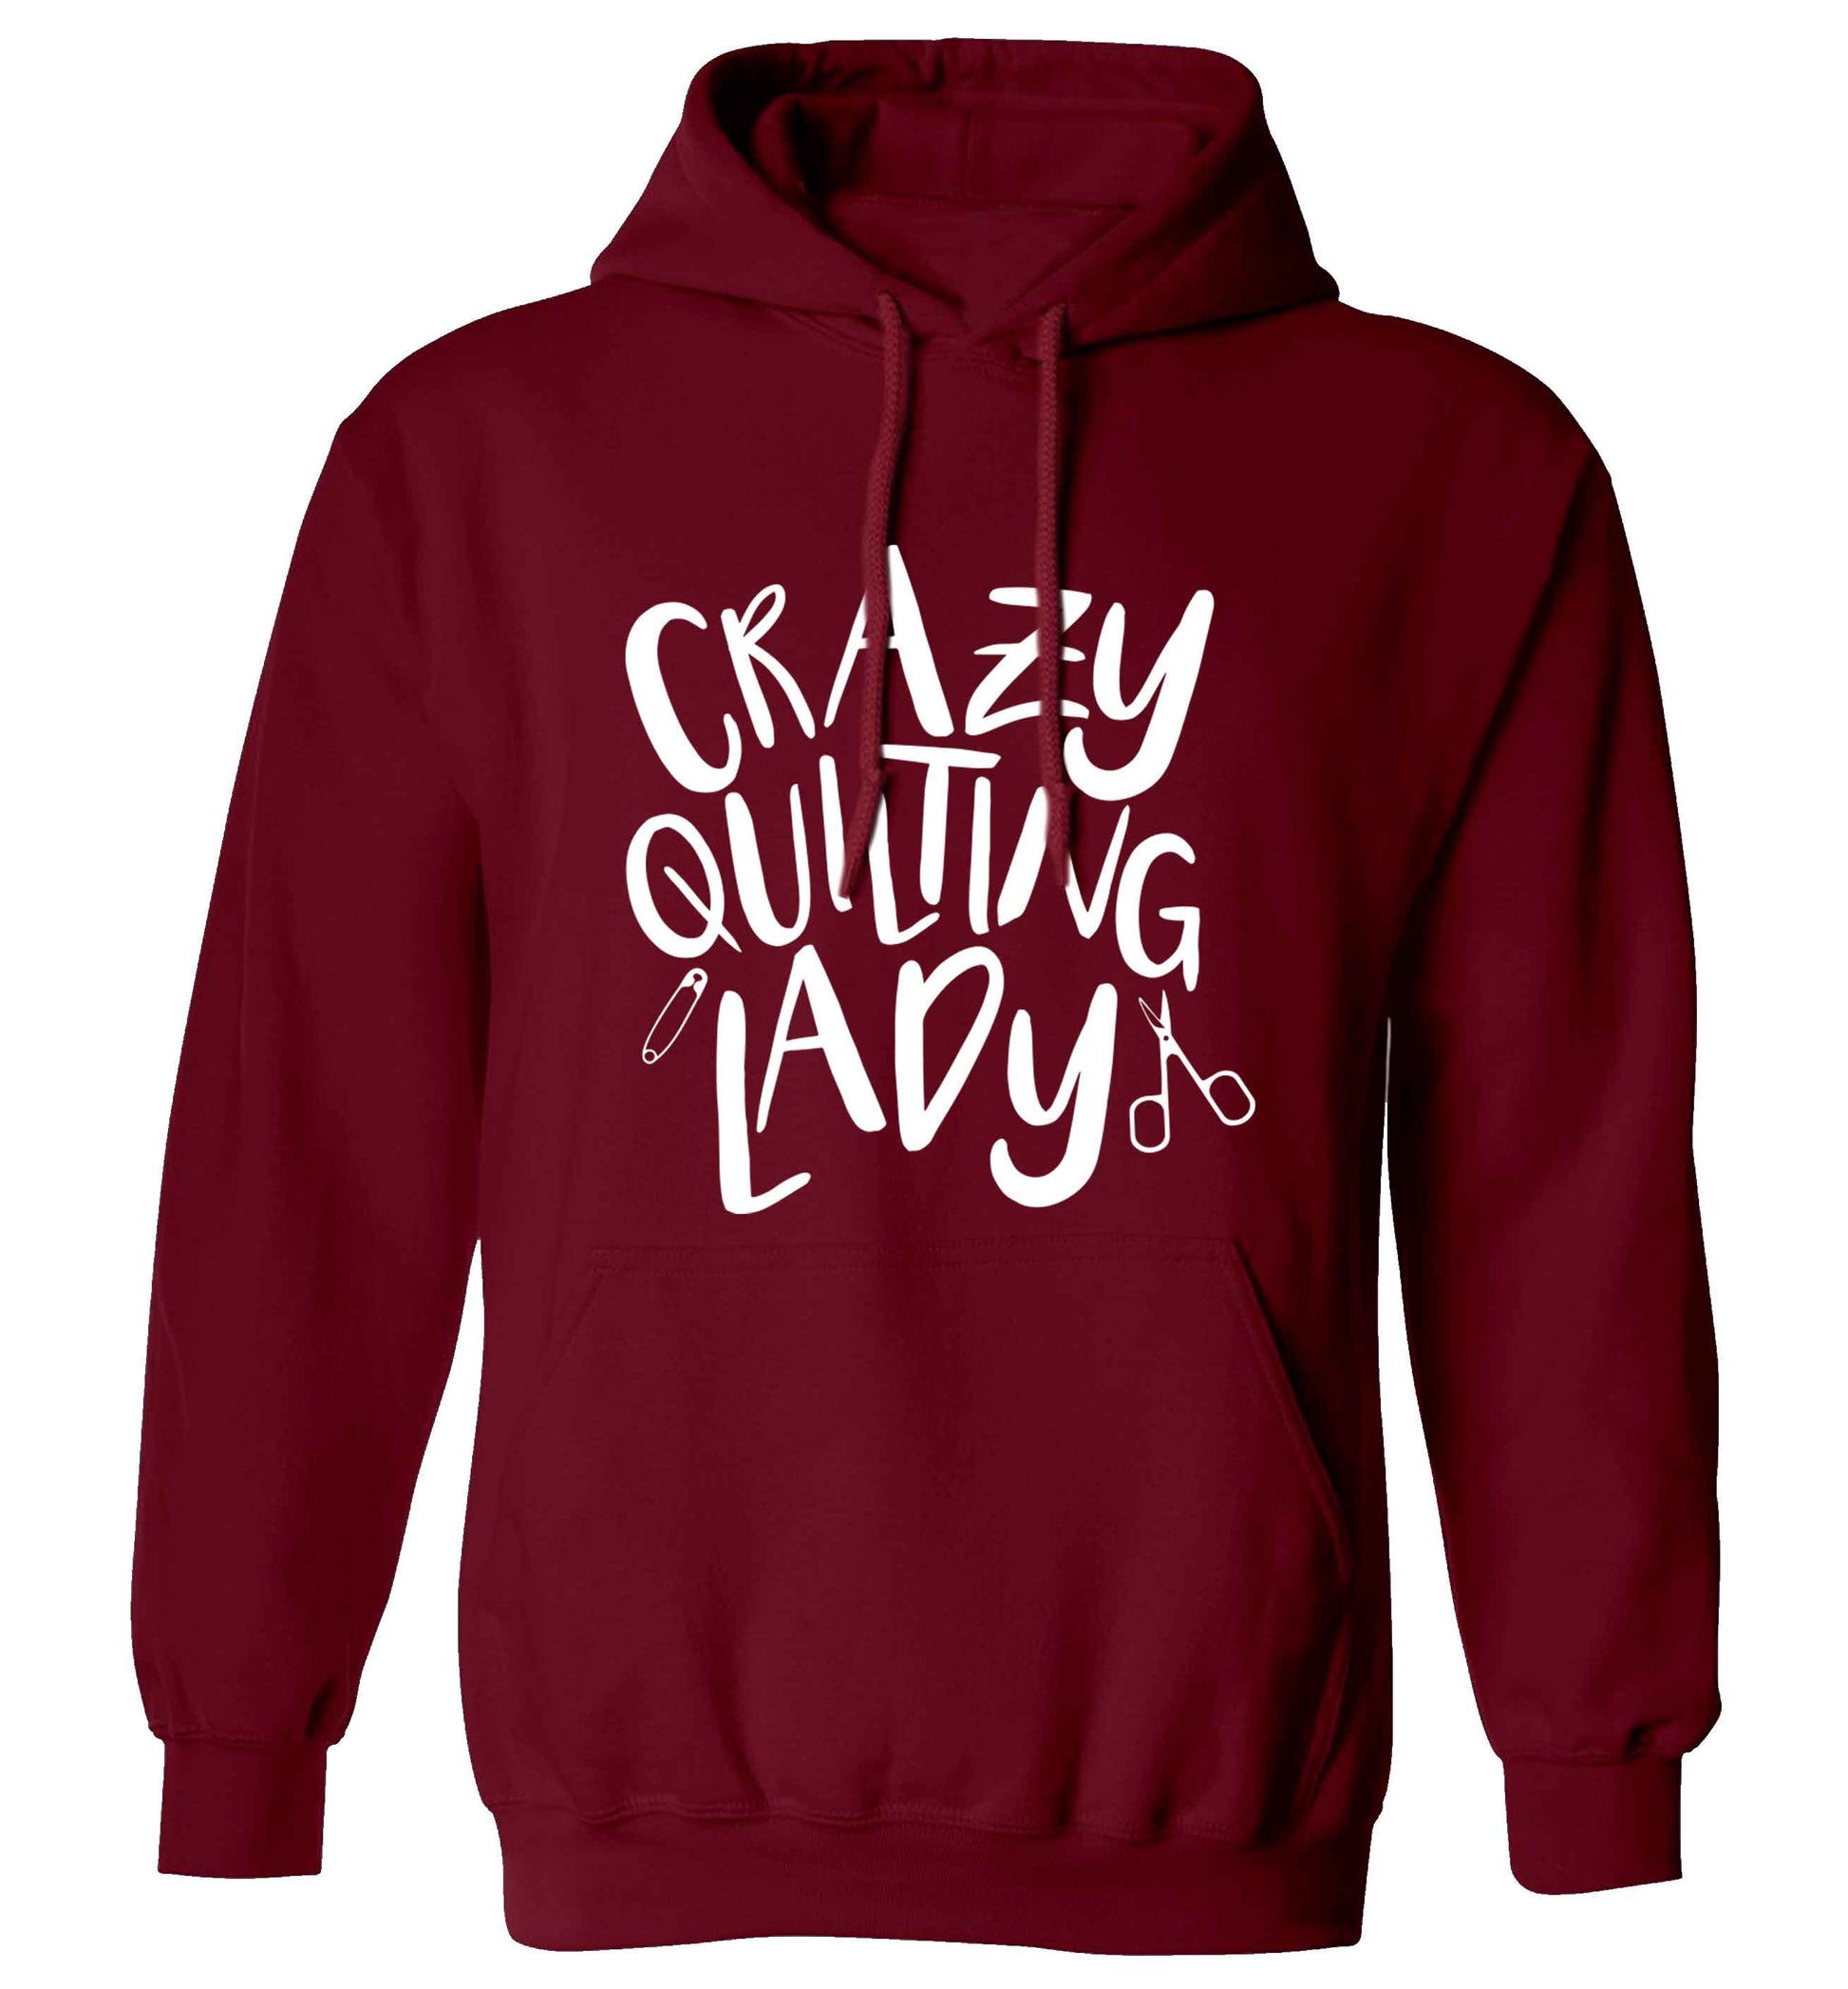 Crazy quilting lady adults unisex maroon hoodie 2XL